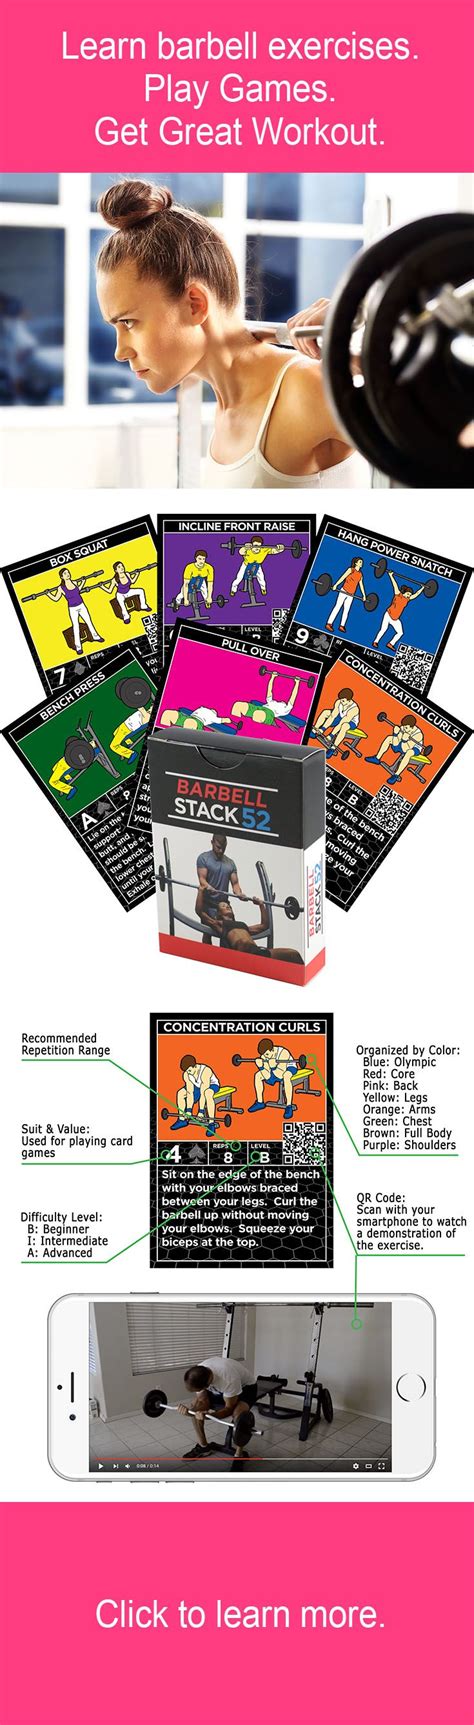 Barbell Stack 52 Stack 52 Barbell Workout Card Workout Barbell